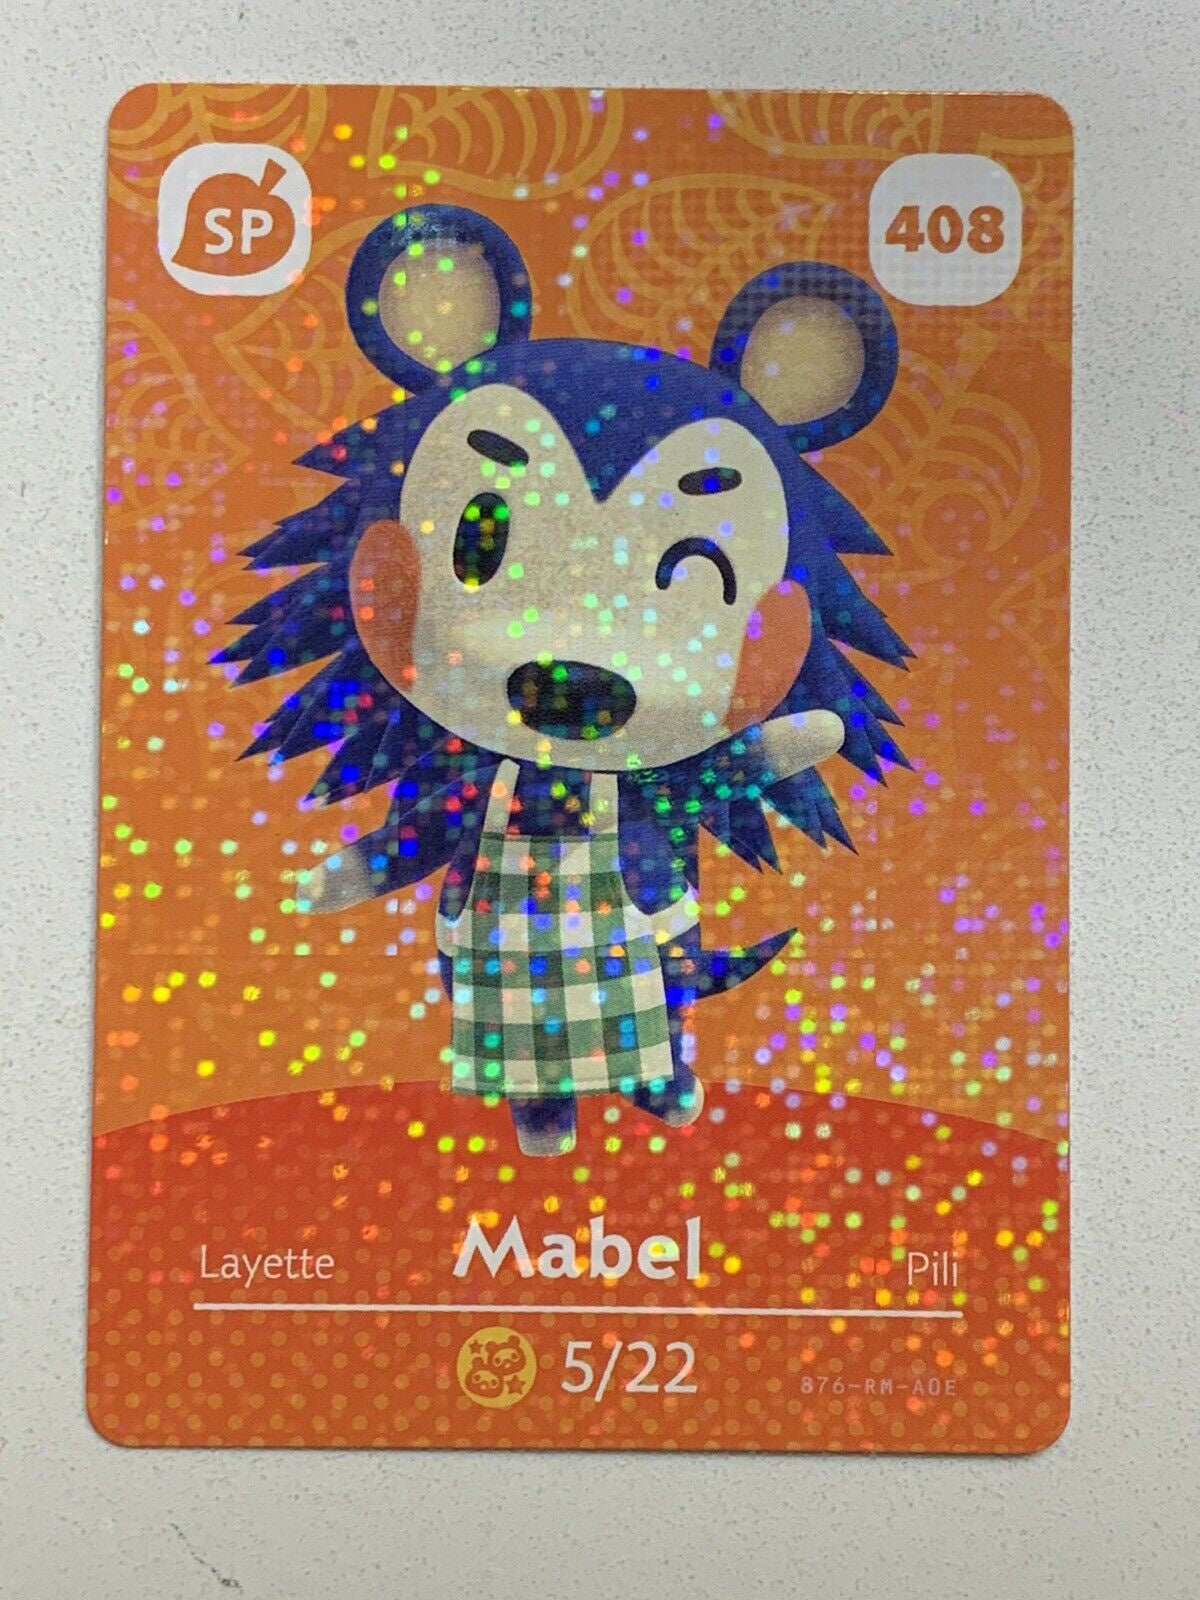 408 Mabel SP Authentic Animal Crossing Amiibo Card - Series 5